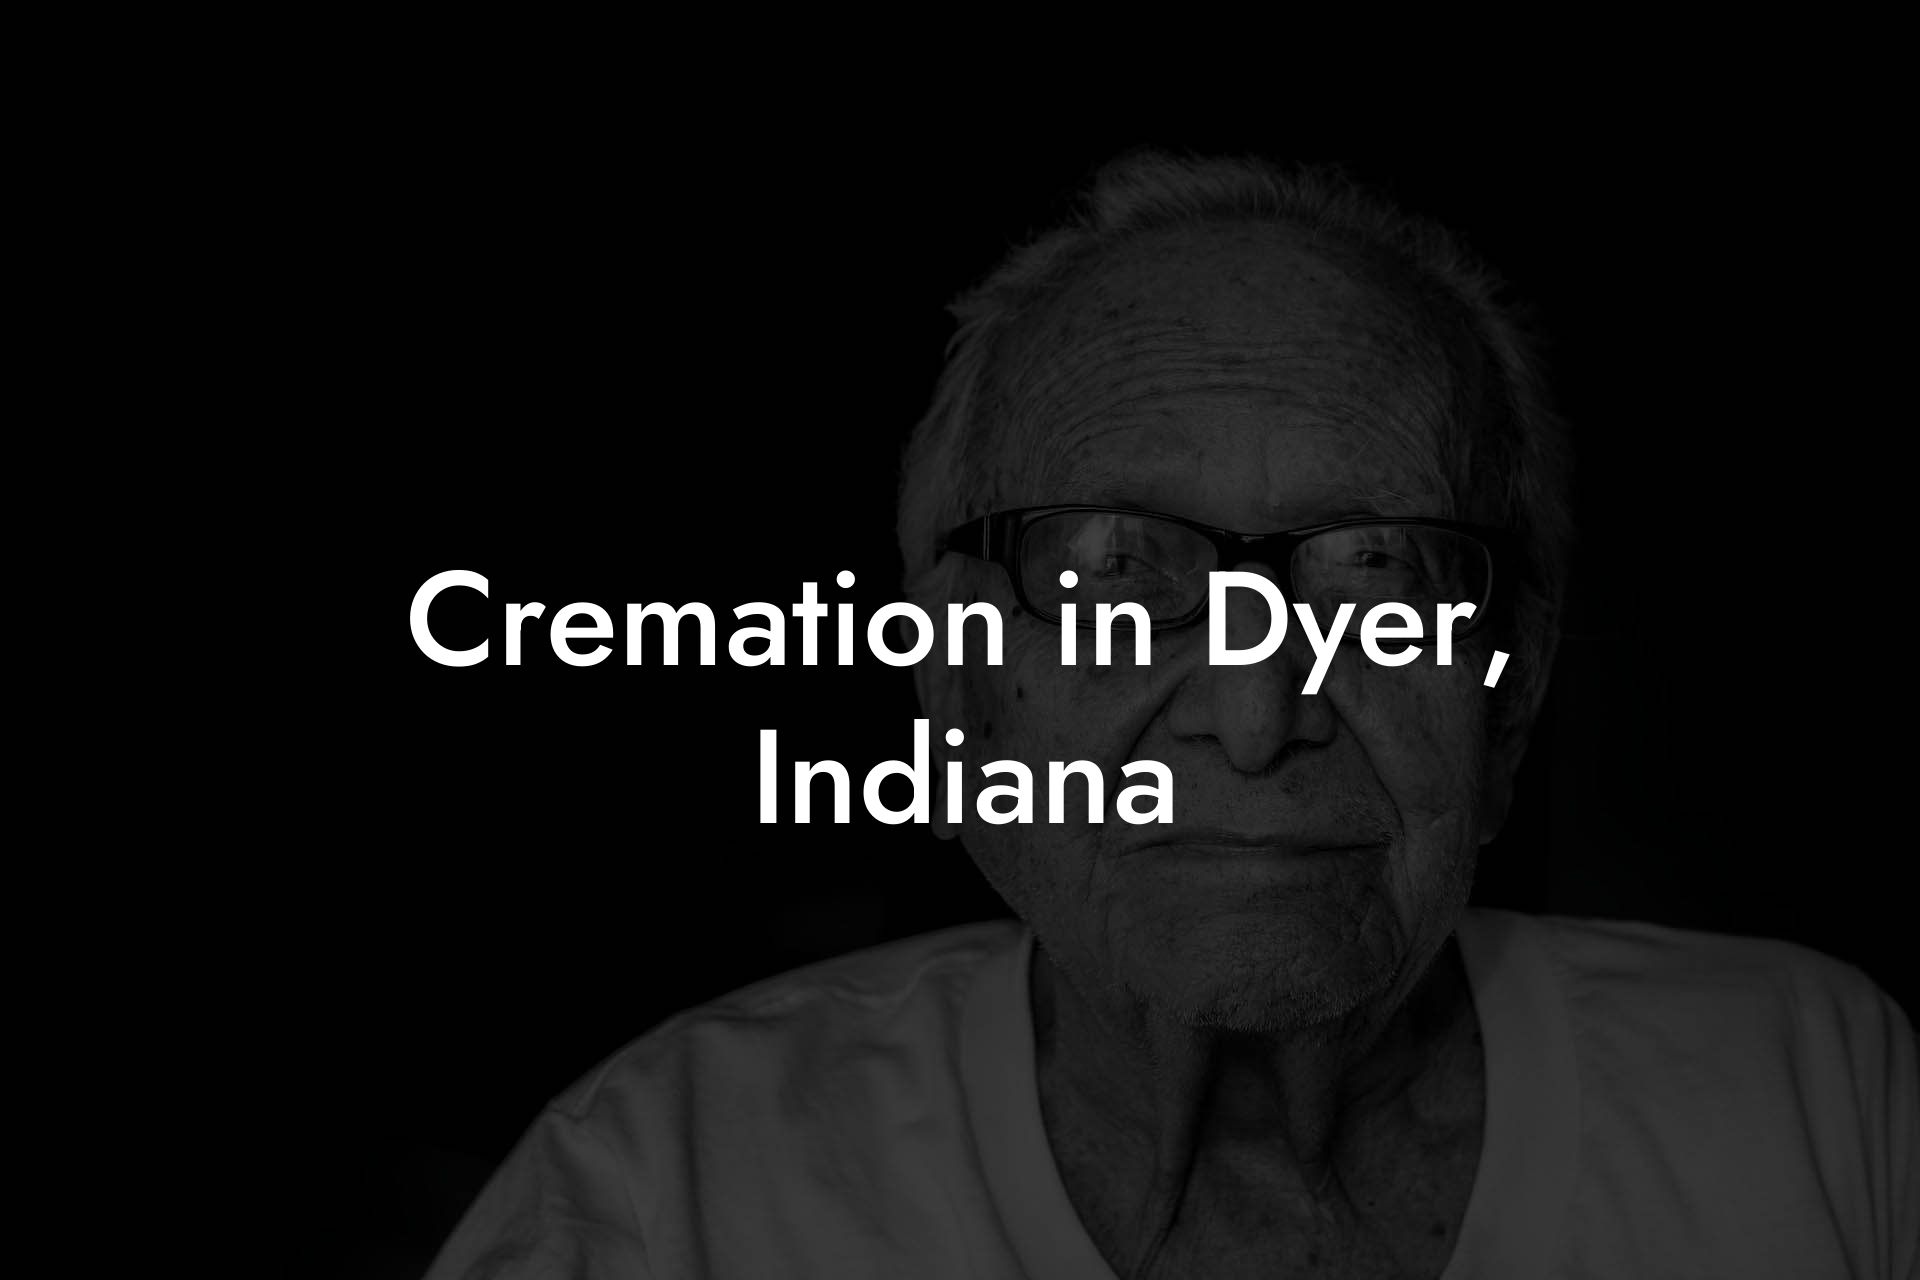 Cremation in Dyer, Indiana